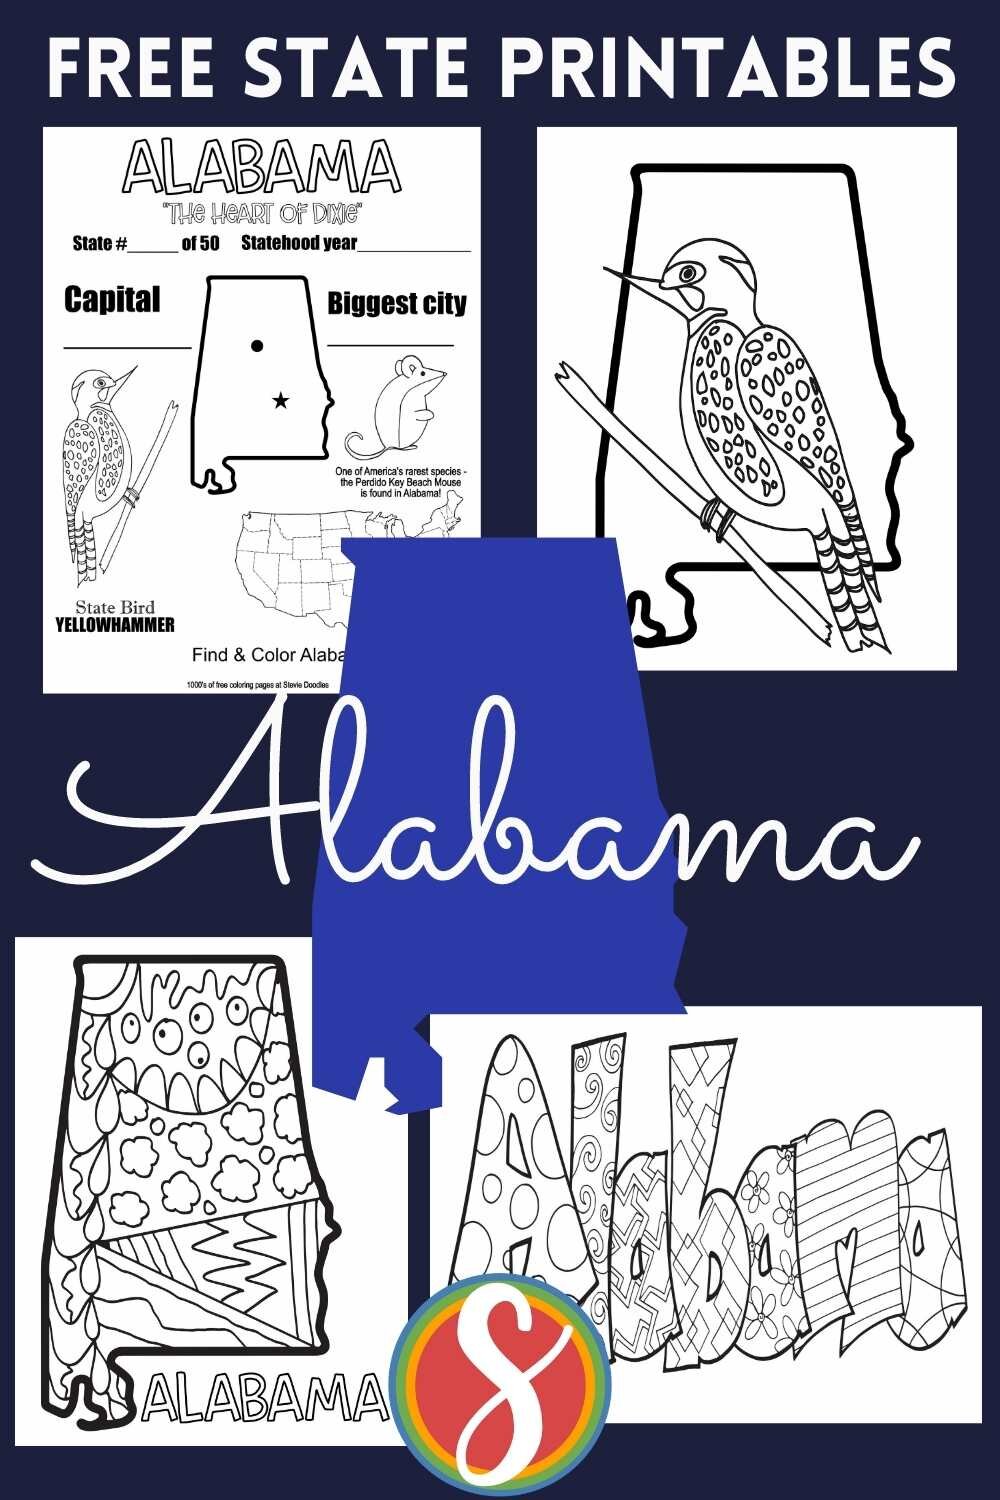 4 alabama coloring pages, facts page, state outline with doodles, state bird on outline of state, and "Alabama" bubble letters filled with doodles